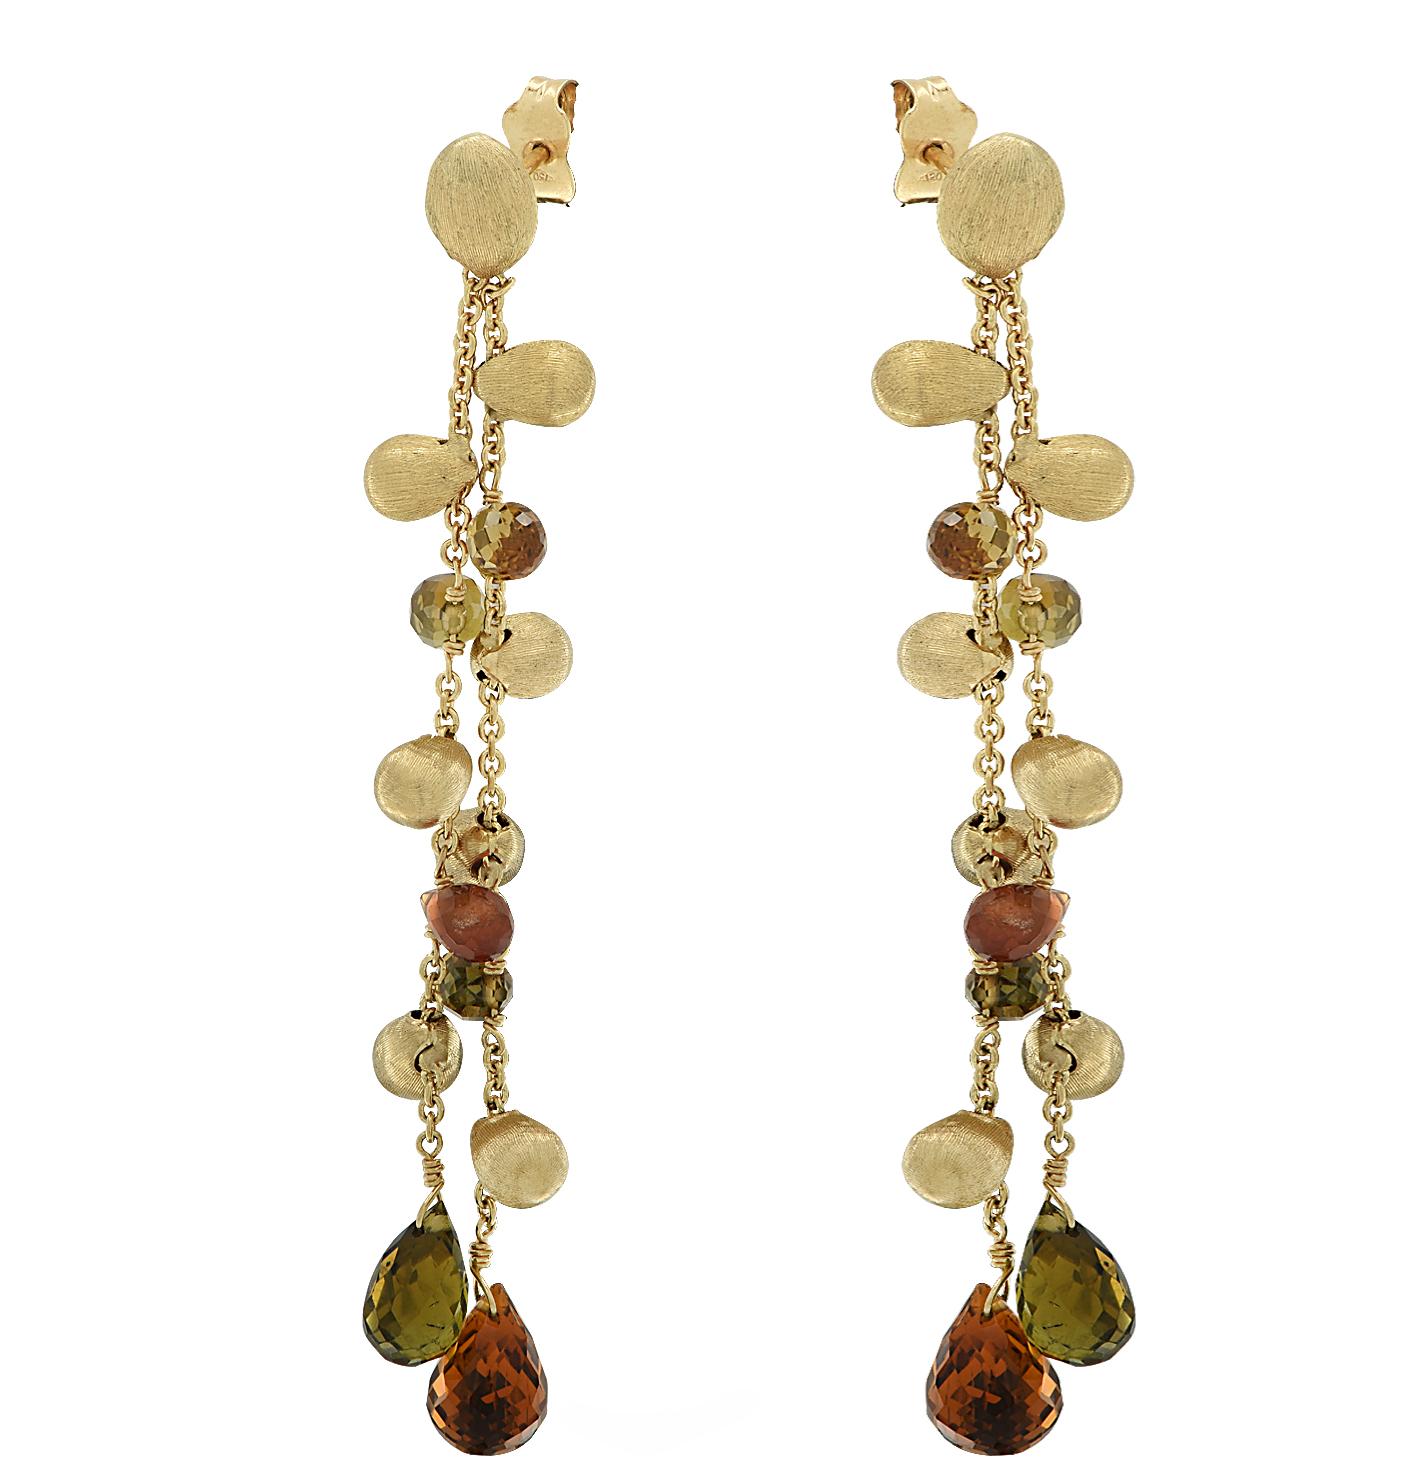 Briolette Cut Marco Bicego Italy, Peridot and Citrine Paradise Double-Strand Dangle Earrings